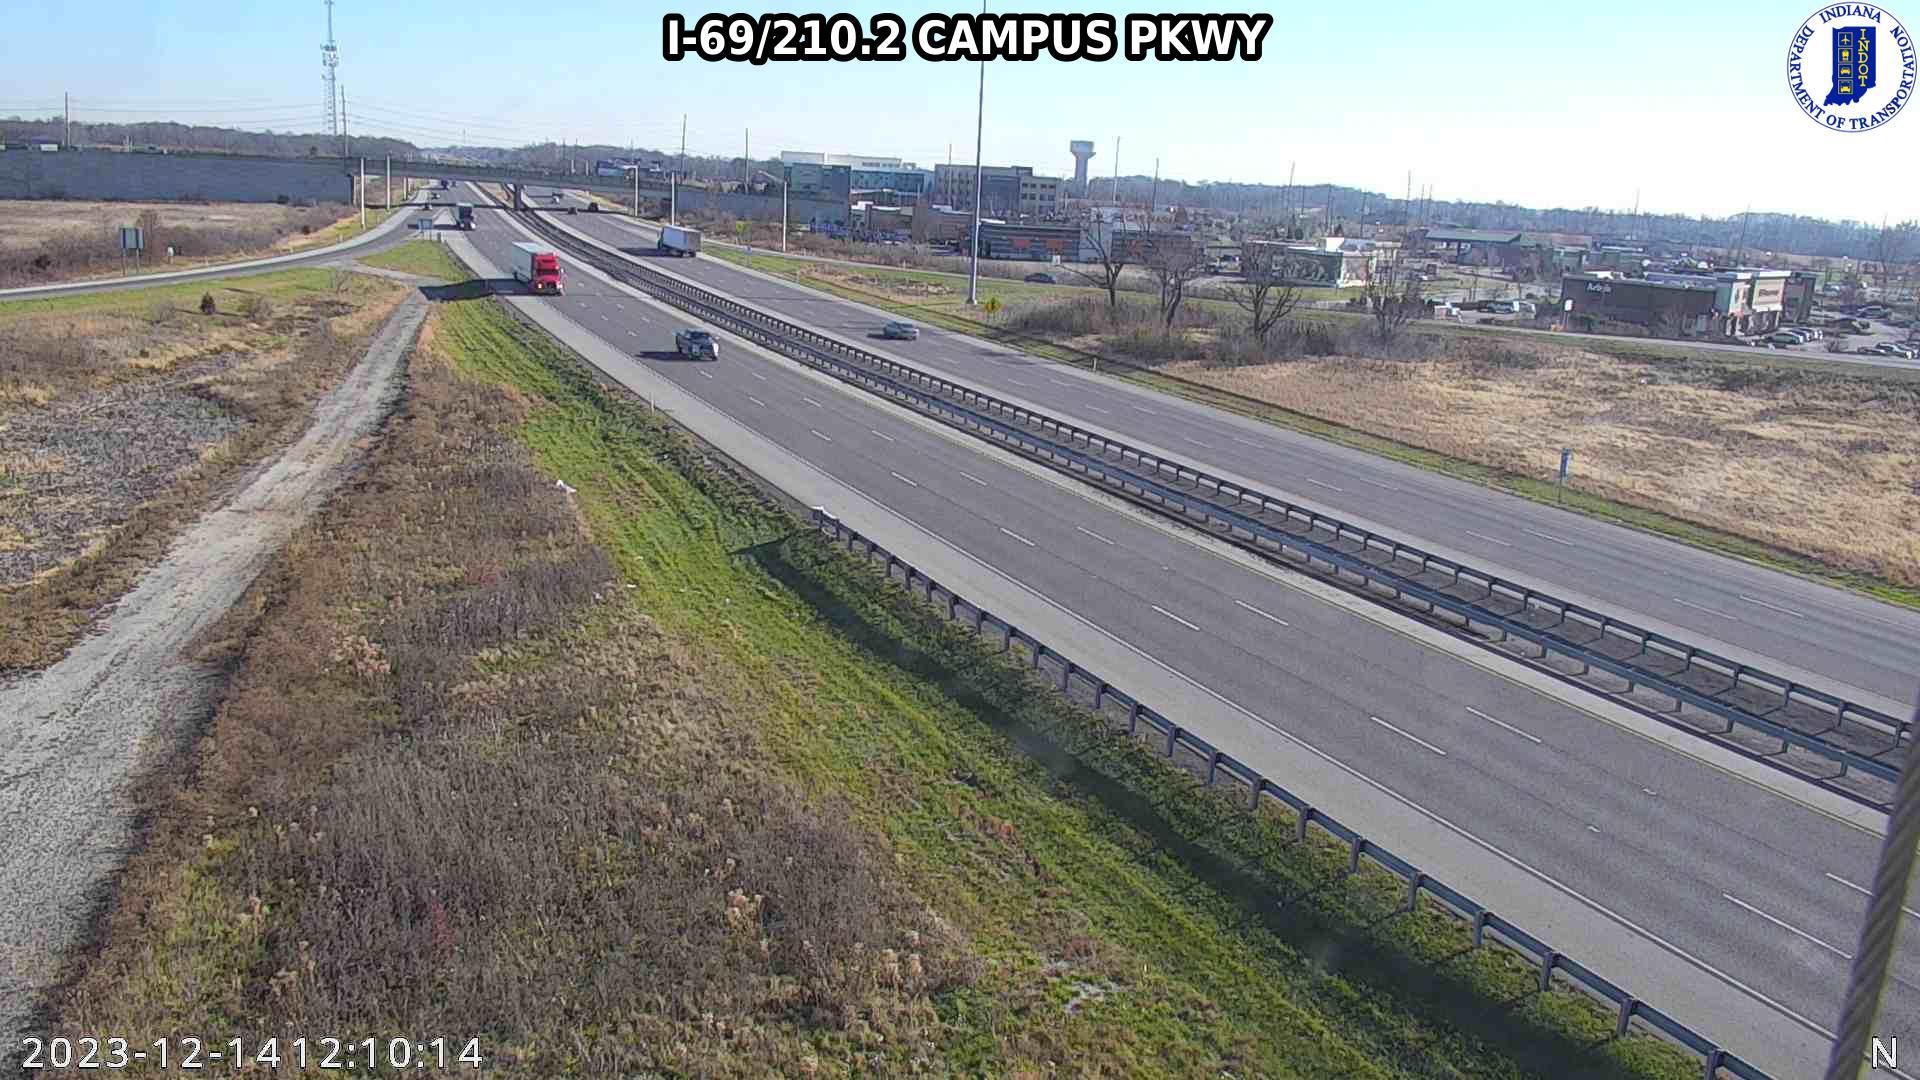 Traffic Cam Noblesville: I-69: I-69/210.2 CAMPUS PKWY: I-69/210.2 CAMPUS PKWY Player